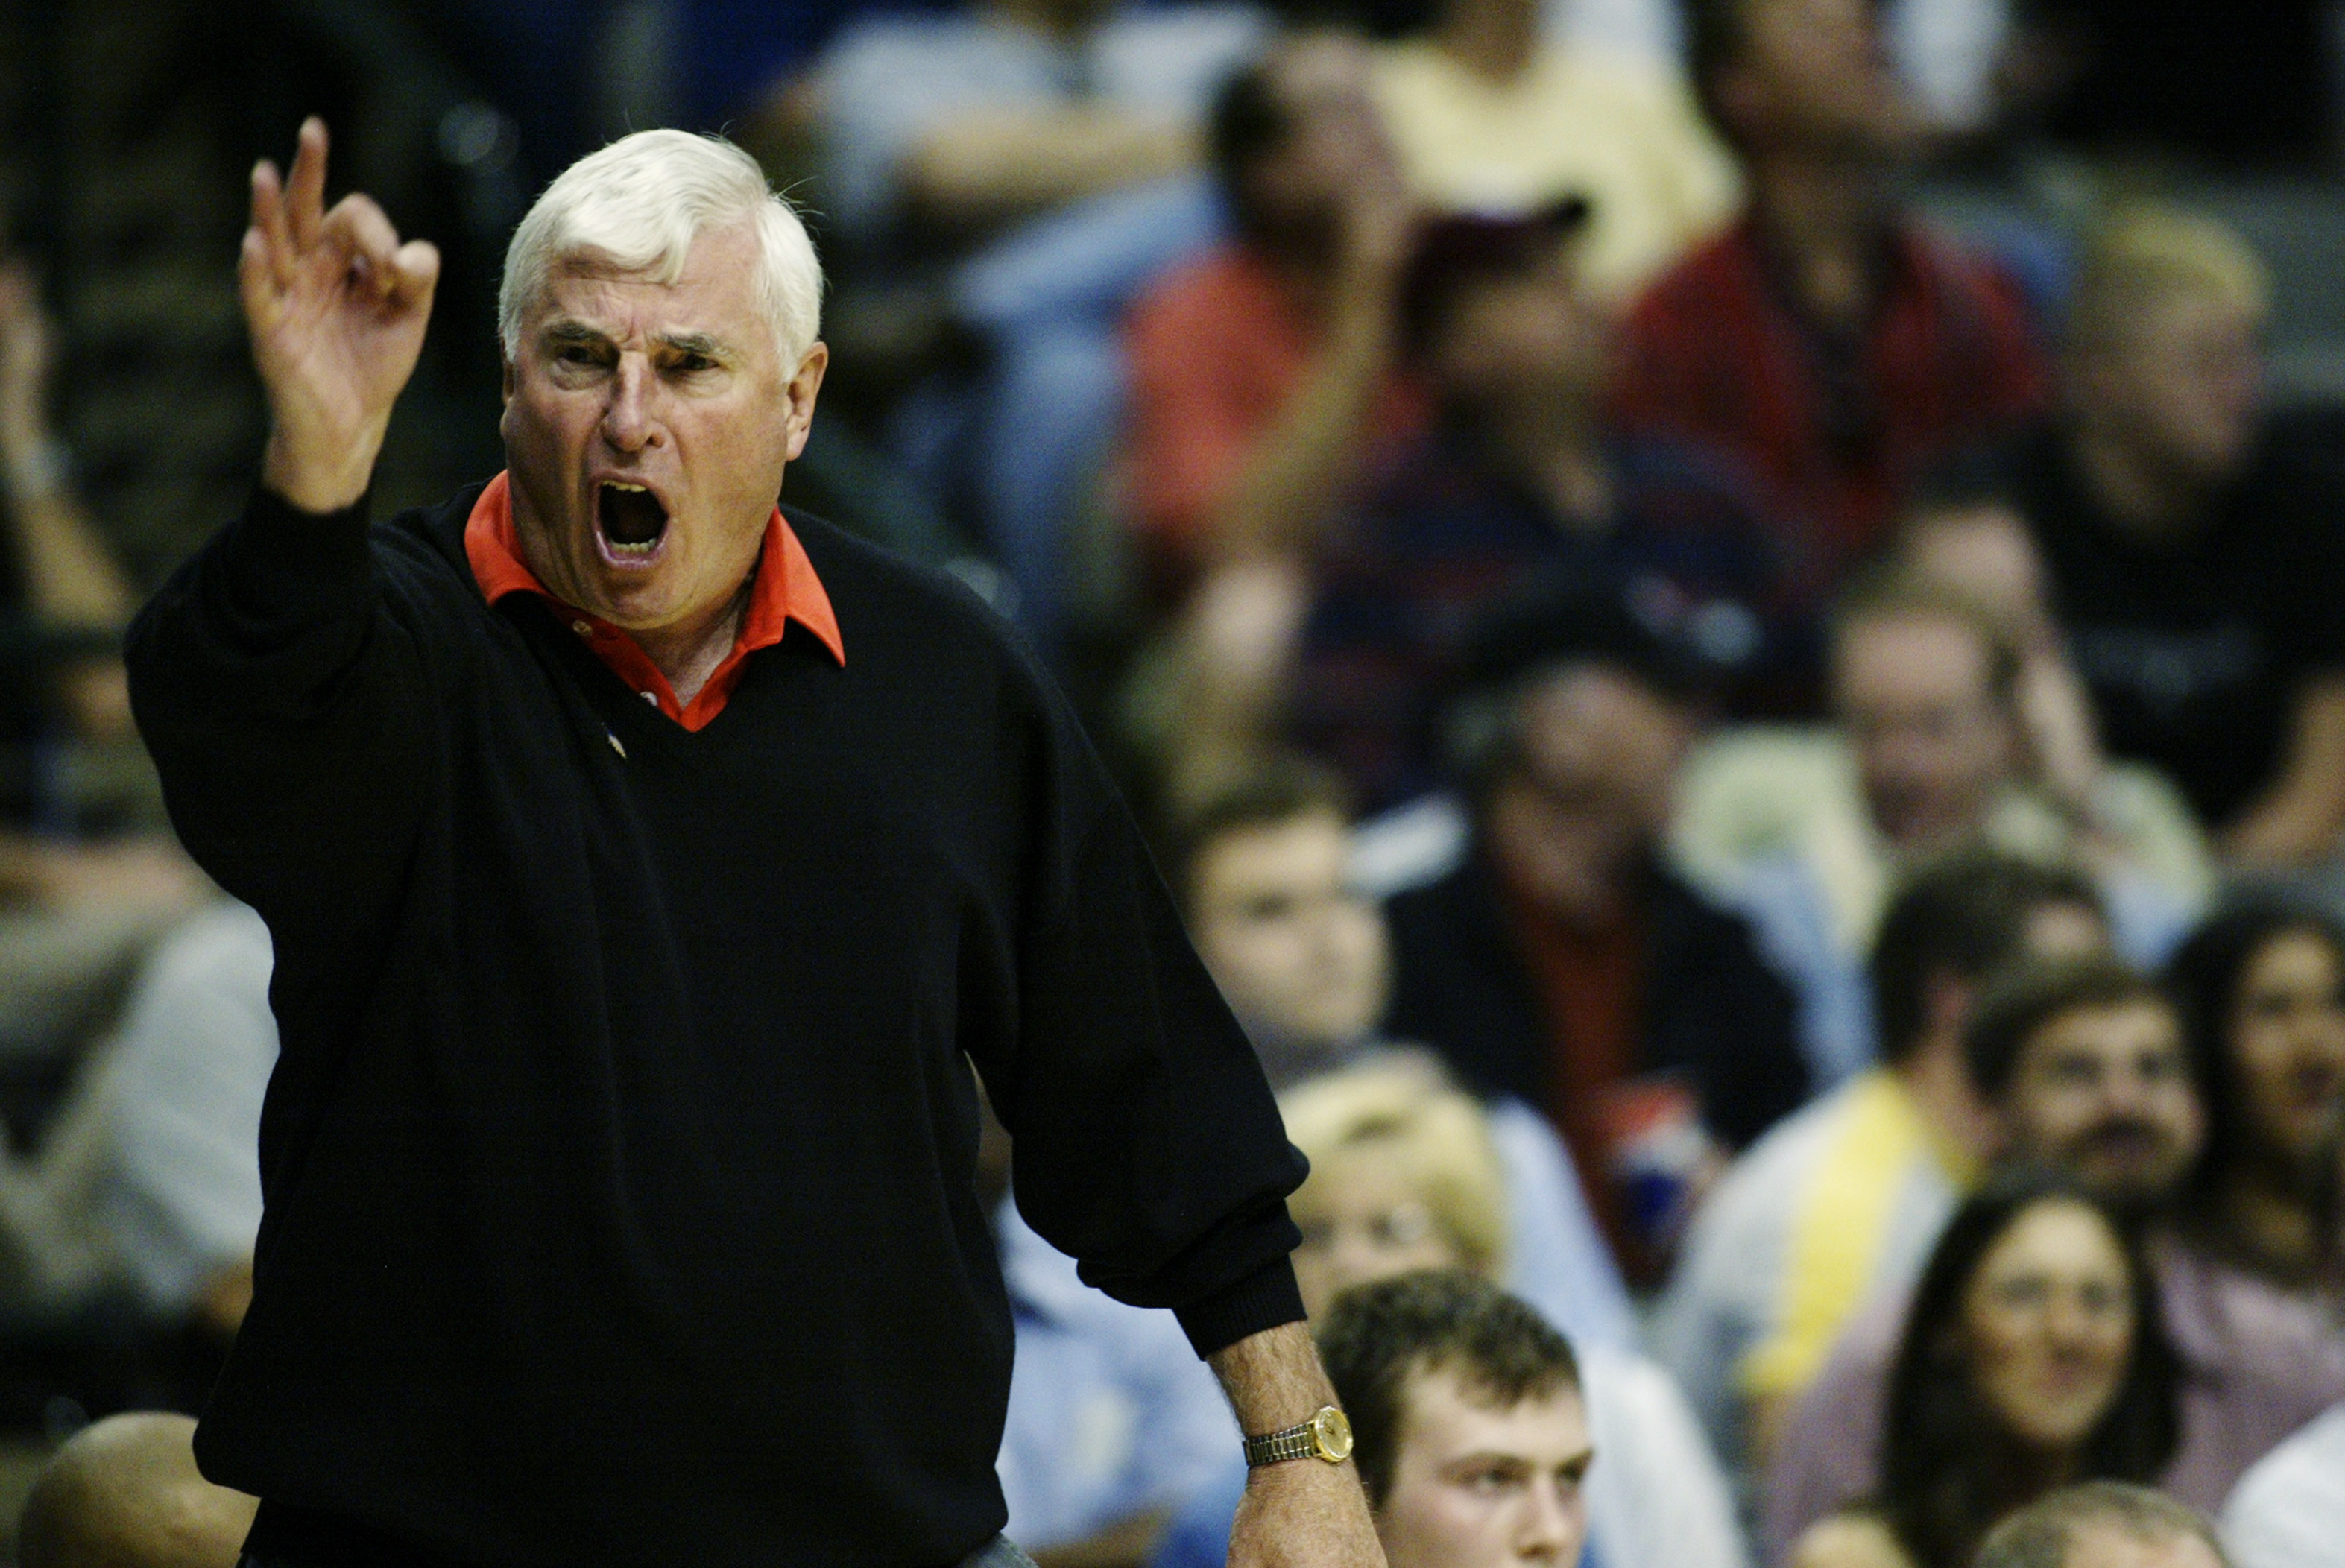 Bobby Knight, Basketball Coach Known for Trophies and Tantrums